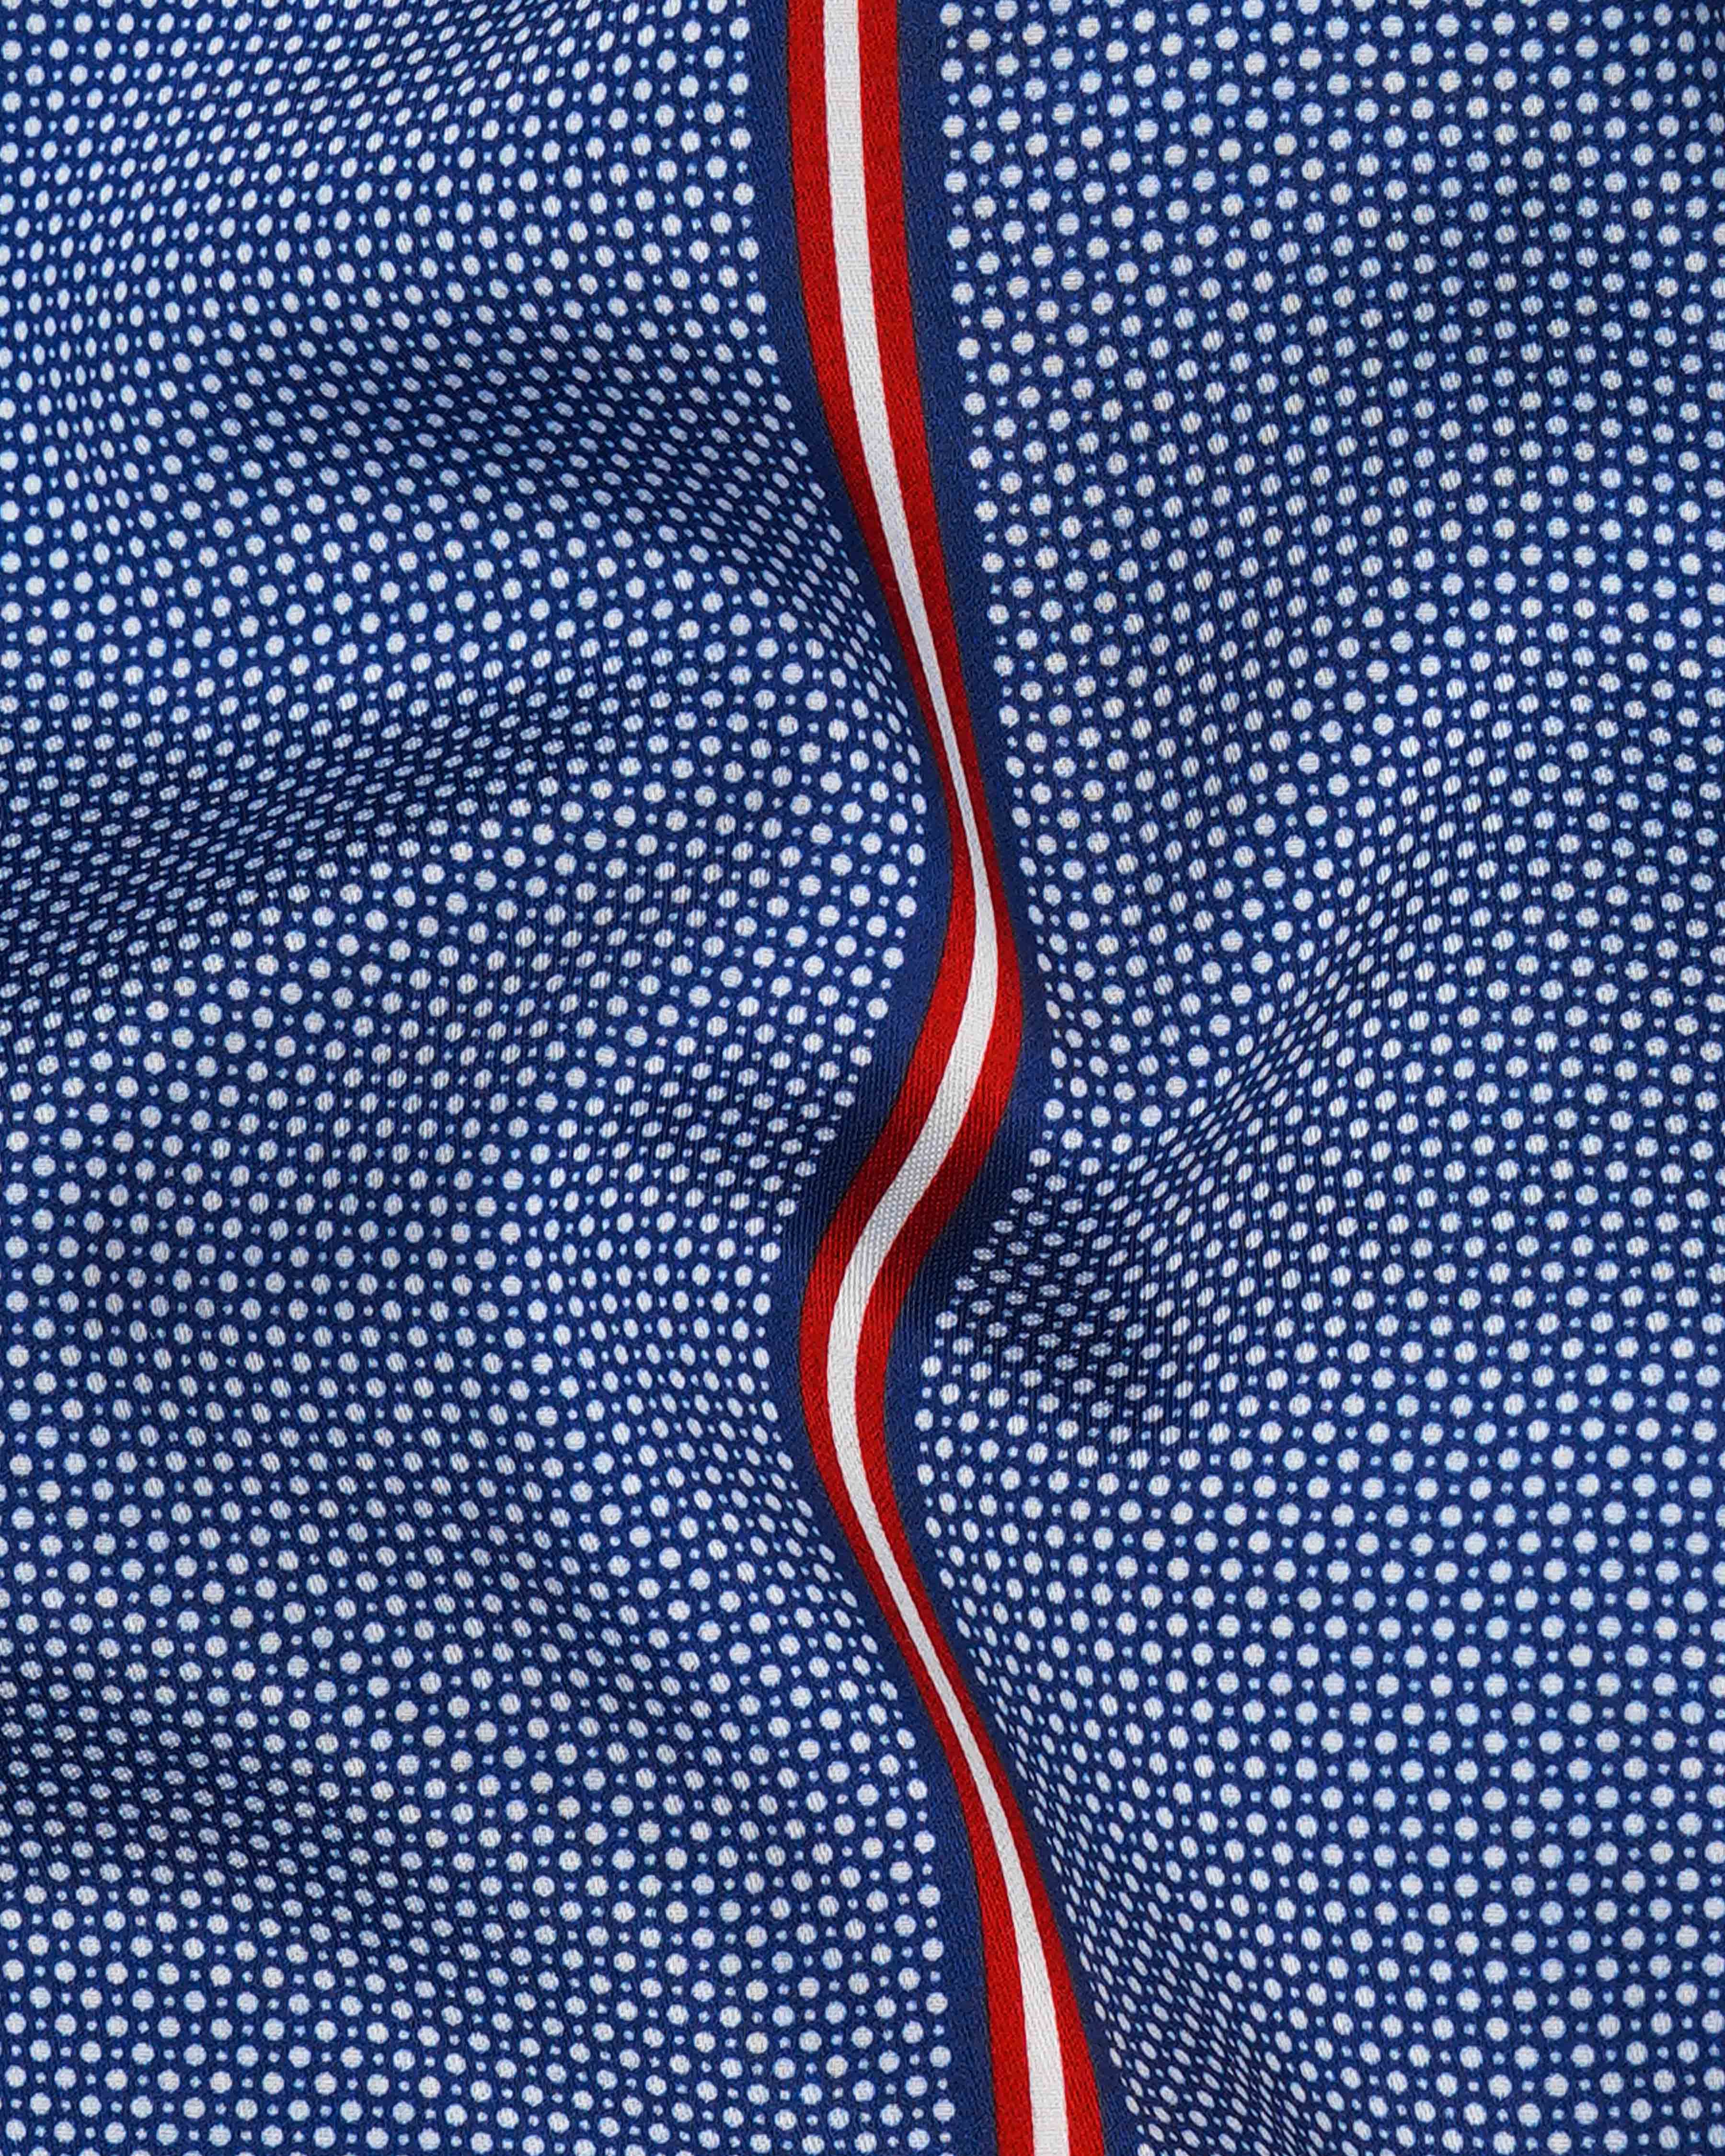 Downriver Blue with Sangria Red and White Polka Dots Super Soft Premium Cotton Shirt 8035-CA-BLE-38,8035-CA-BLE-38,8035-CA-BLE-39,8035-CA-BLE-39,8035-CA-BLE-40,8035-CA-BLE-40,8035-CA-BLE-42,8035-CA-BLE-42,8035-CA-BLE-44,8035-CA-BLE-44,8035-CA-BLE-46,8035-CA-BLE-46,8035-CA-BLE-48,8035-CA-BLE-48,8035-CA-BLE-50,8035-CA-BLE-50,8035-CA-BLE-52,8035-CA-BLE-52